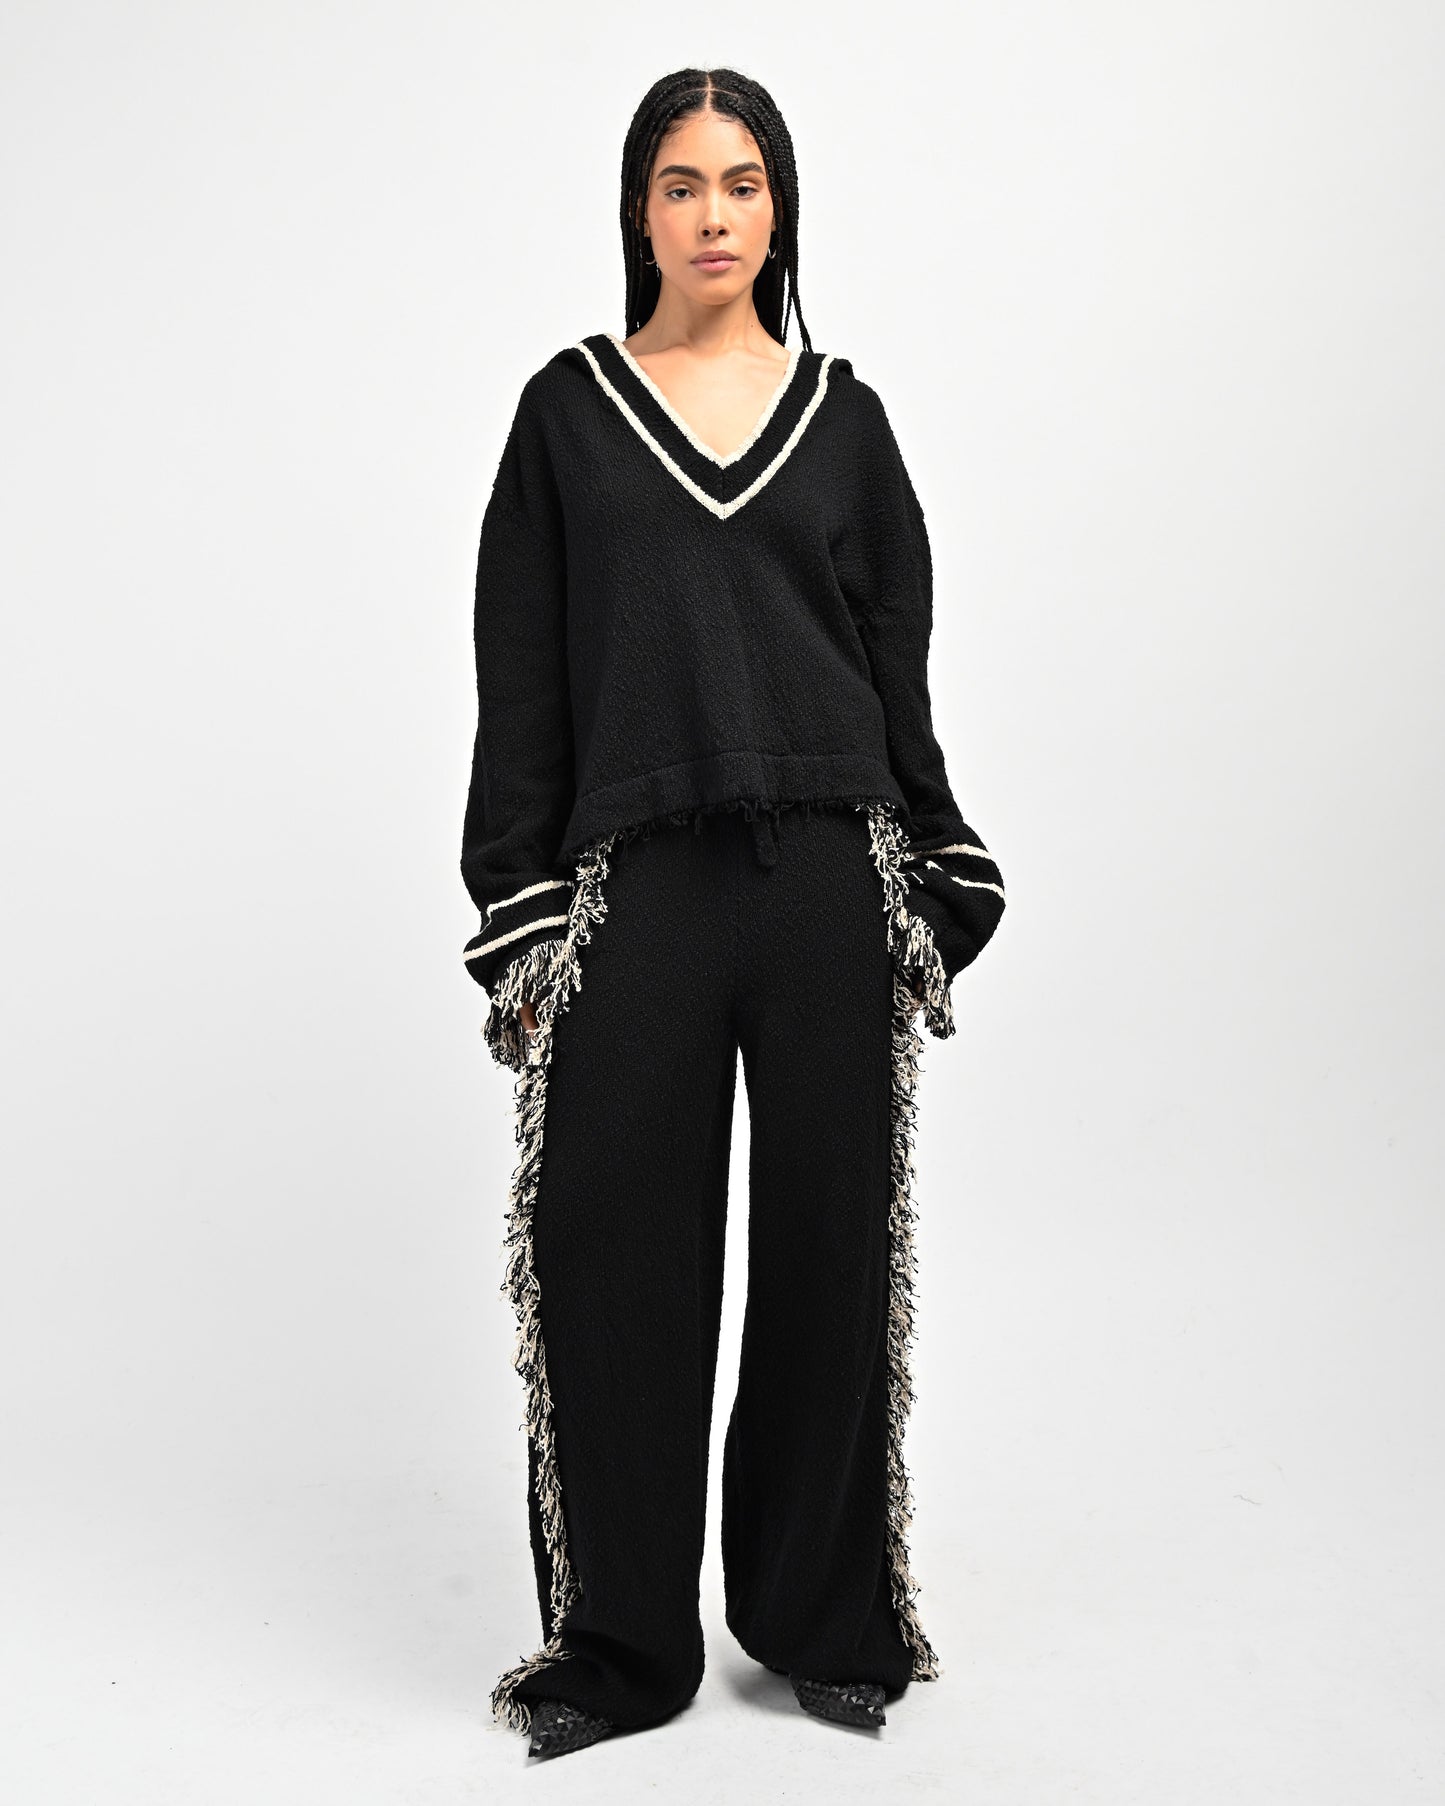 Model is wearing Andy Fringe Knit Hoodie and Andy Fringe Knit Pants in Black by Aseye Studio